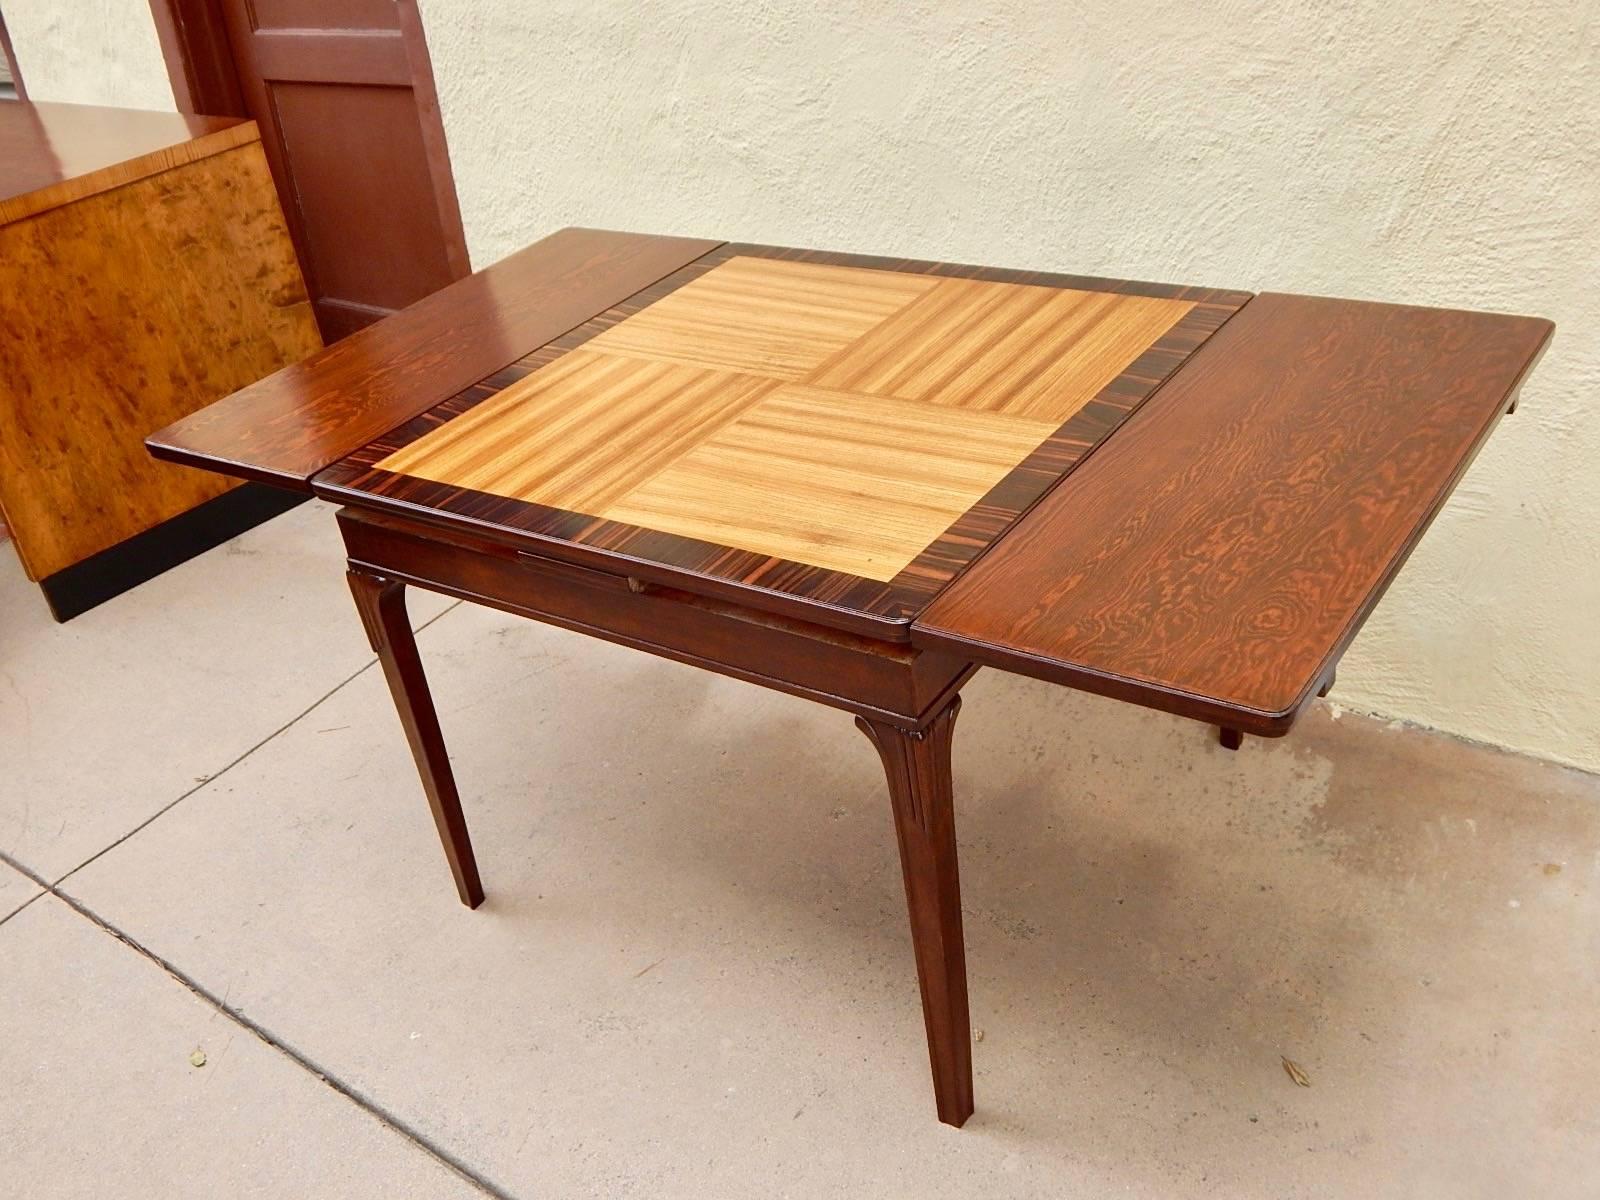 Birch Swedish Art Deco Extendible Side Table by Eric Chambert, circa 1930 For Sale